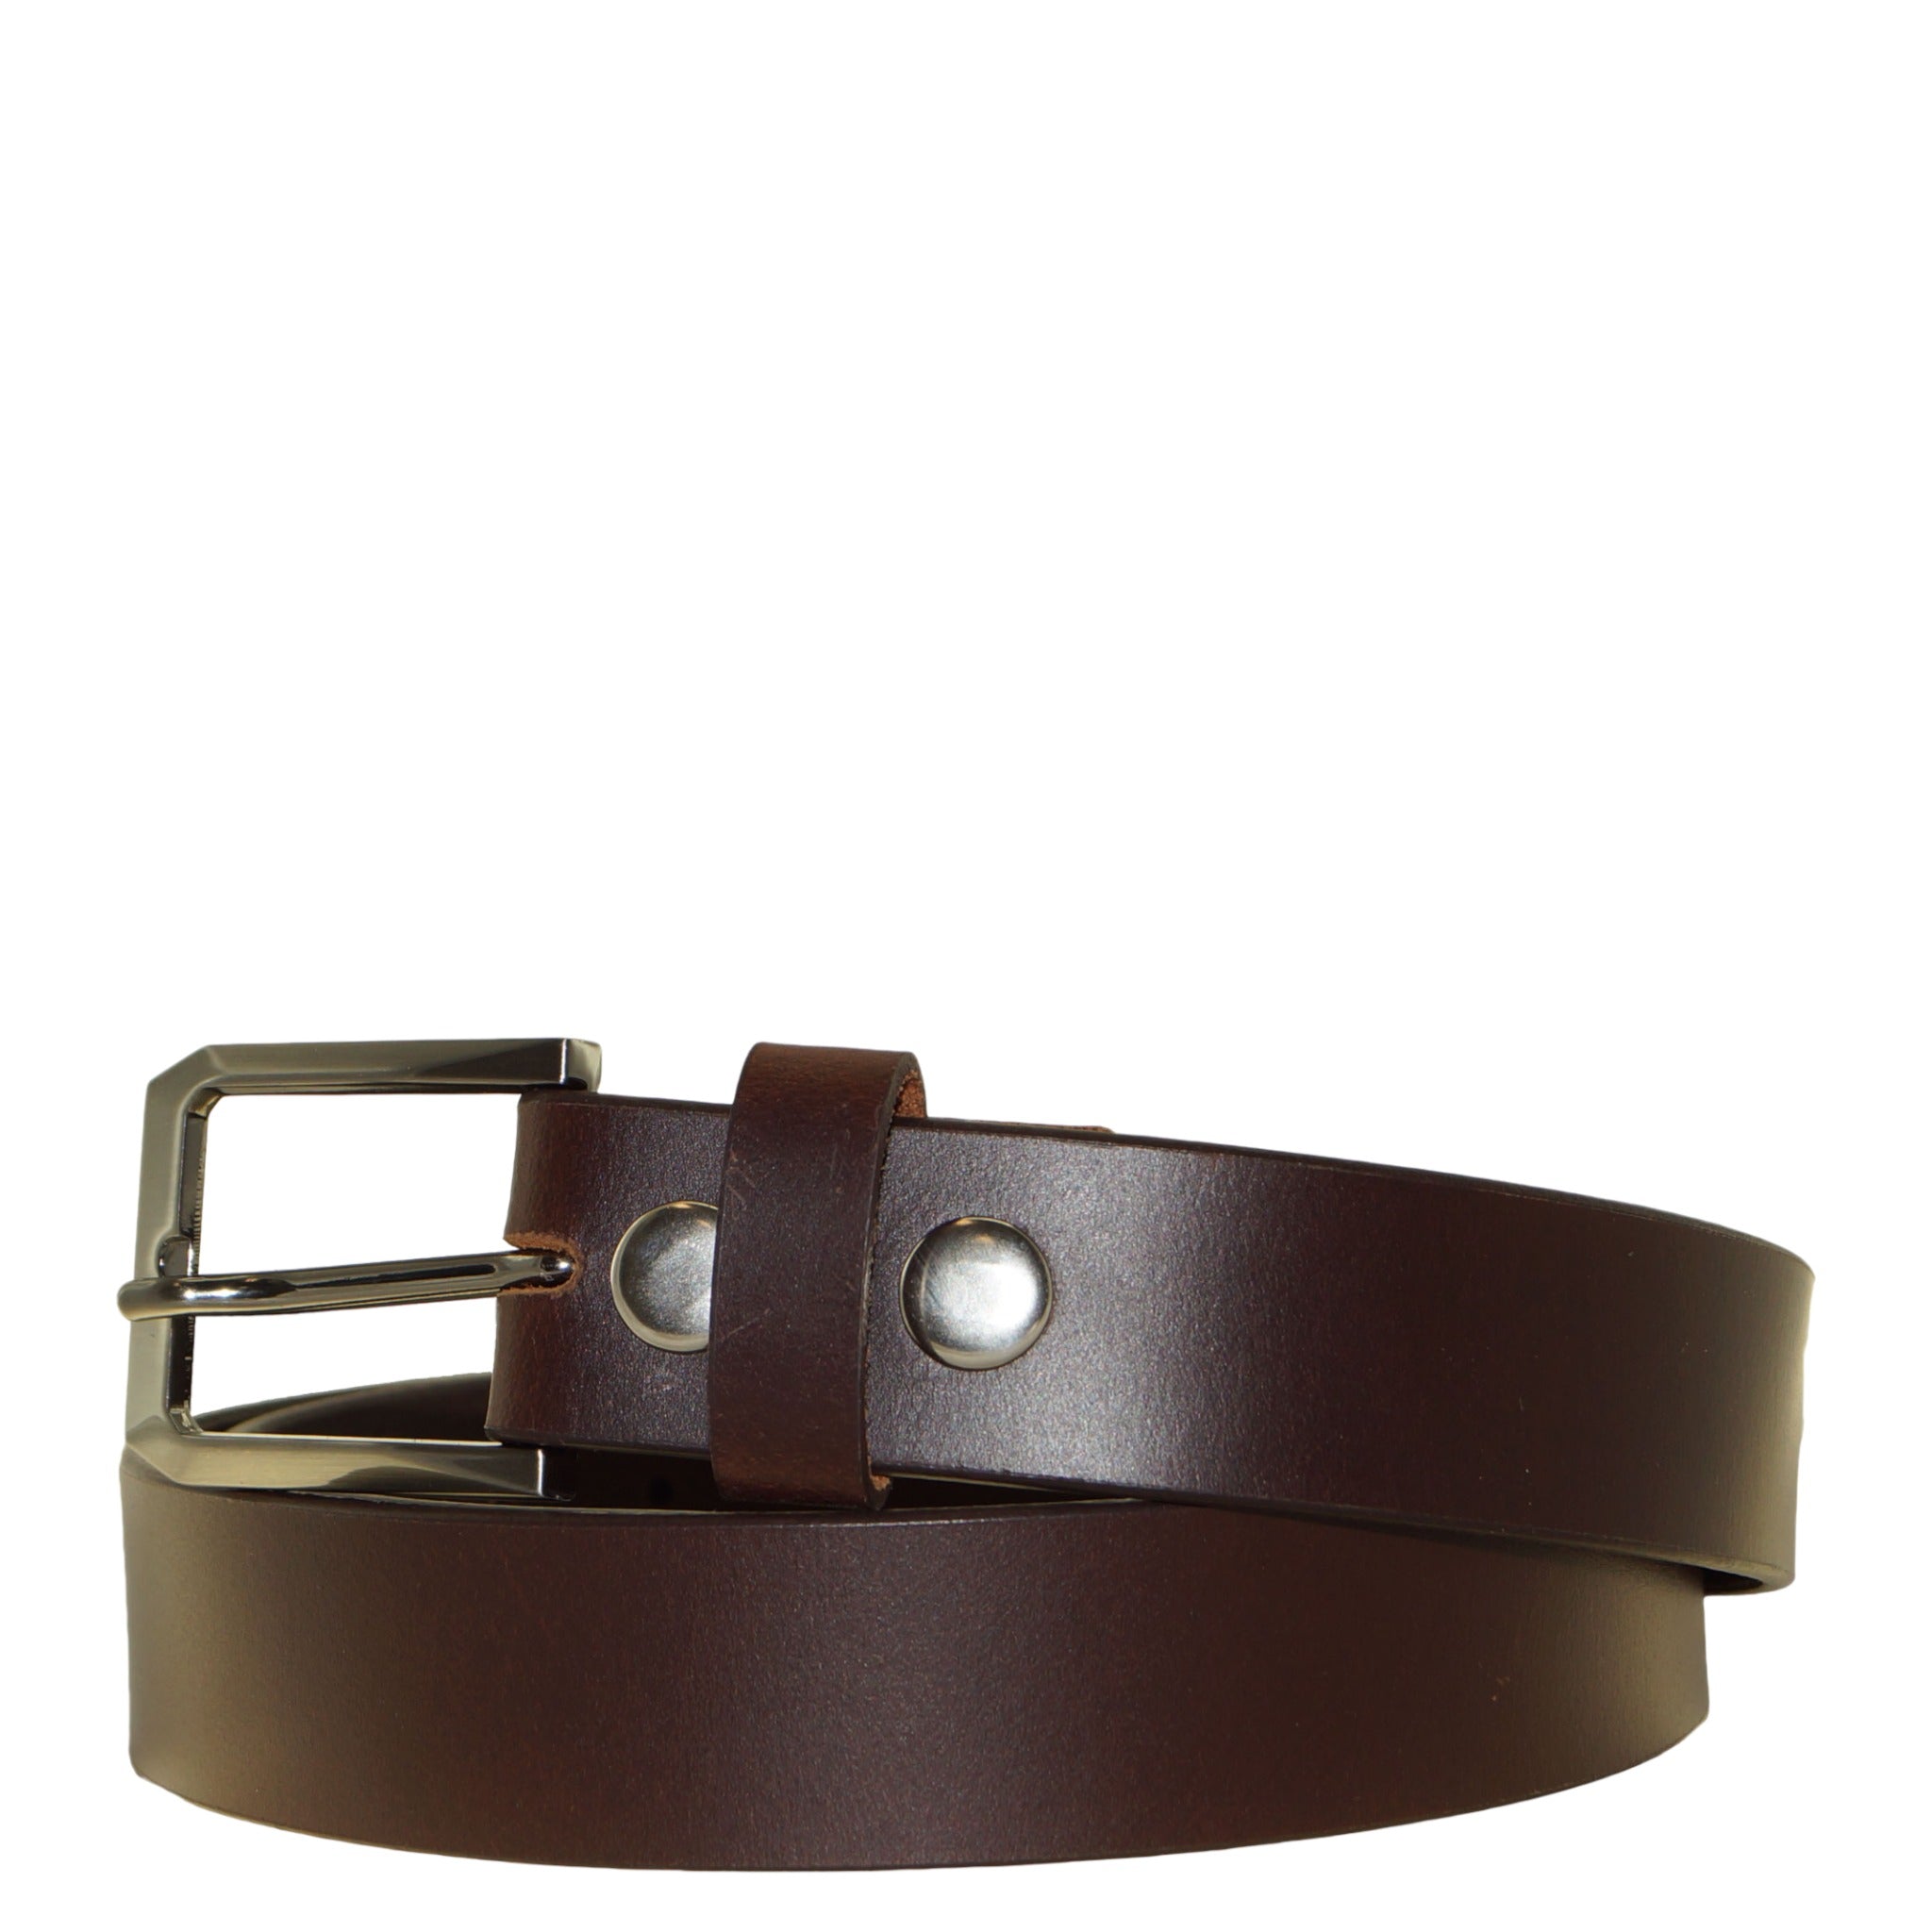 Brown Replaceable Square Buckle Leather Belt. 38mm width. Size 48"